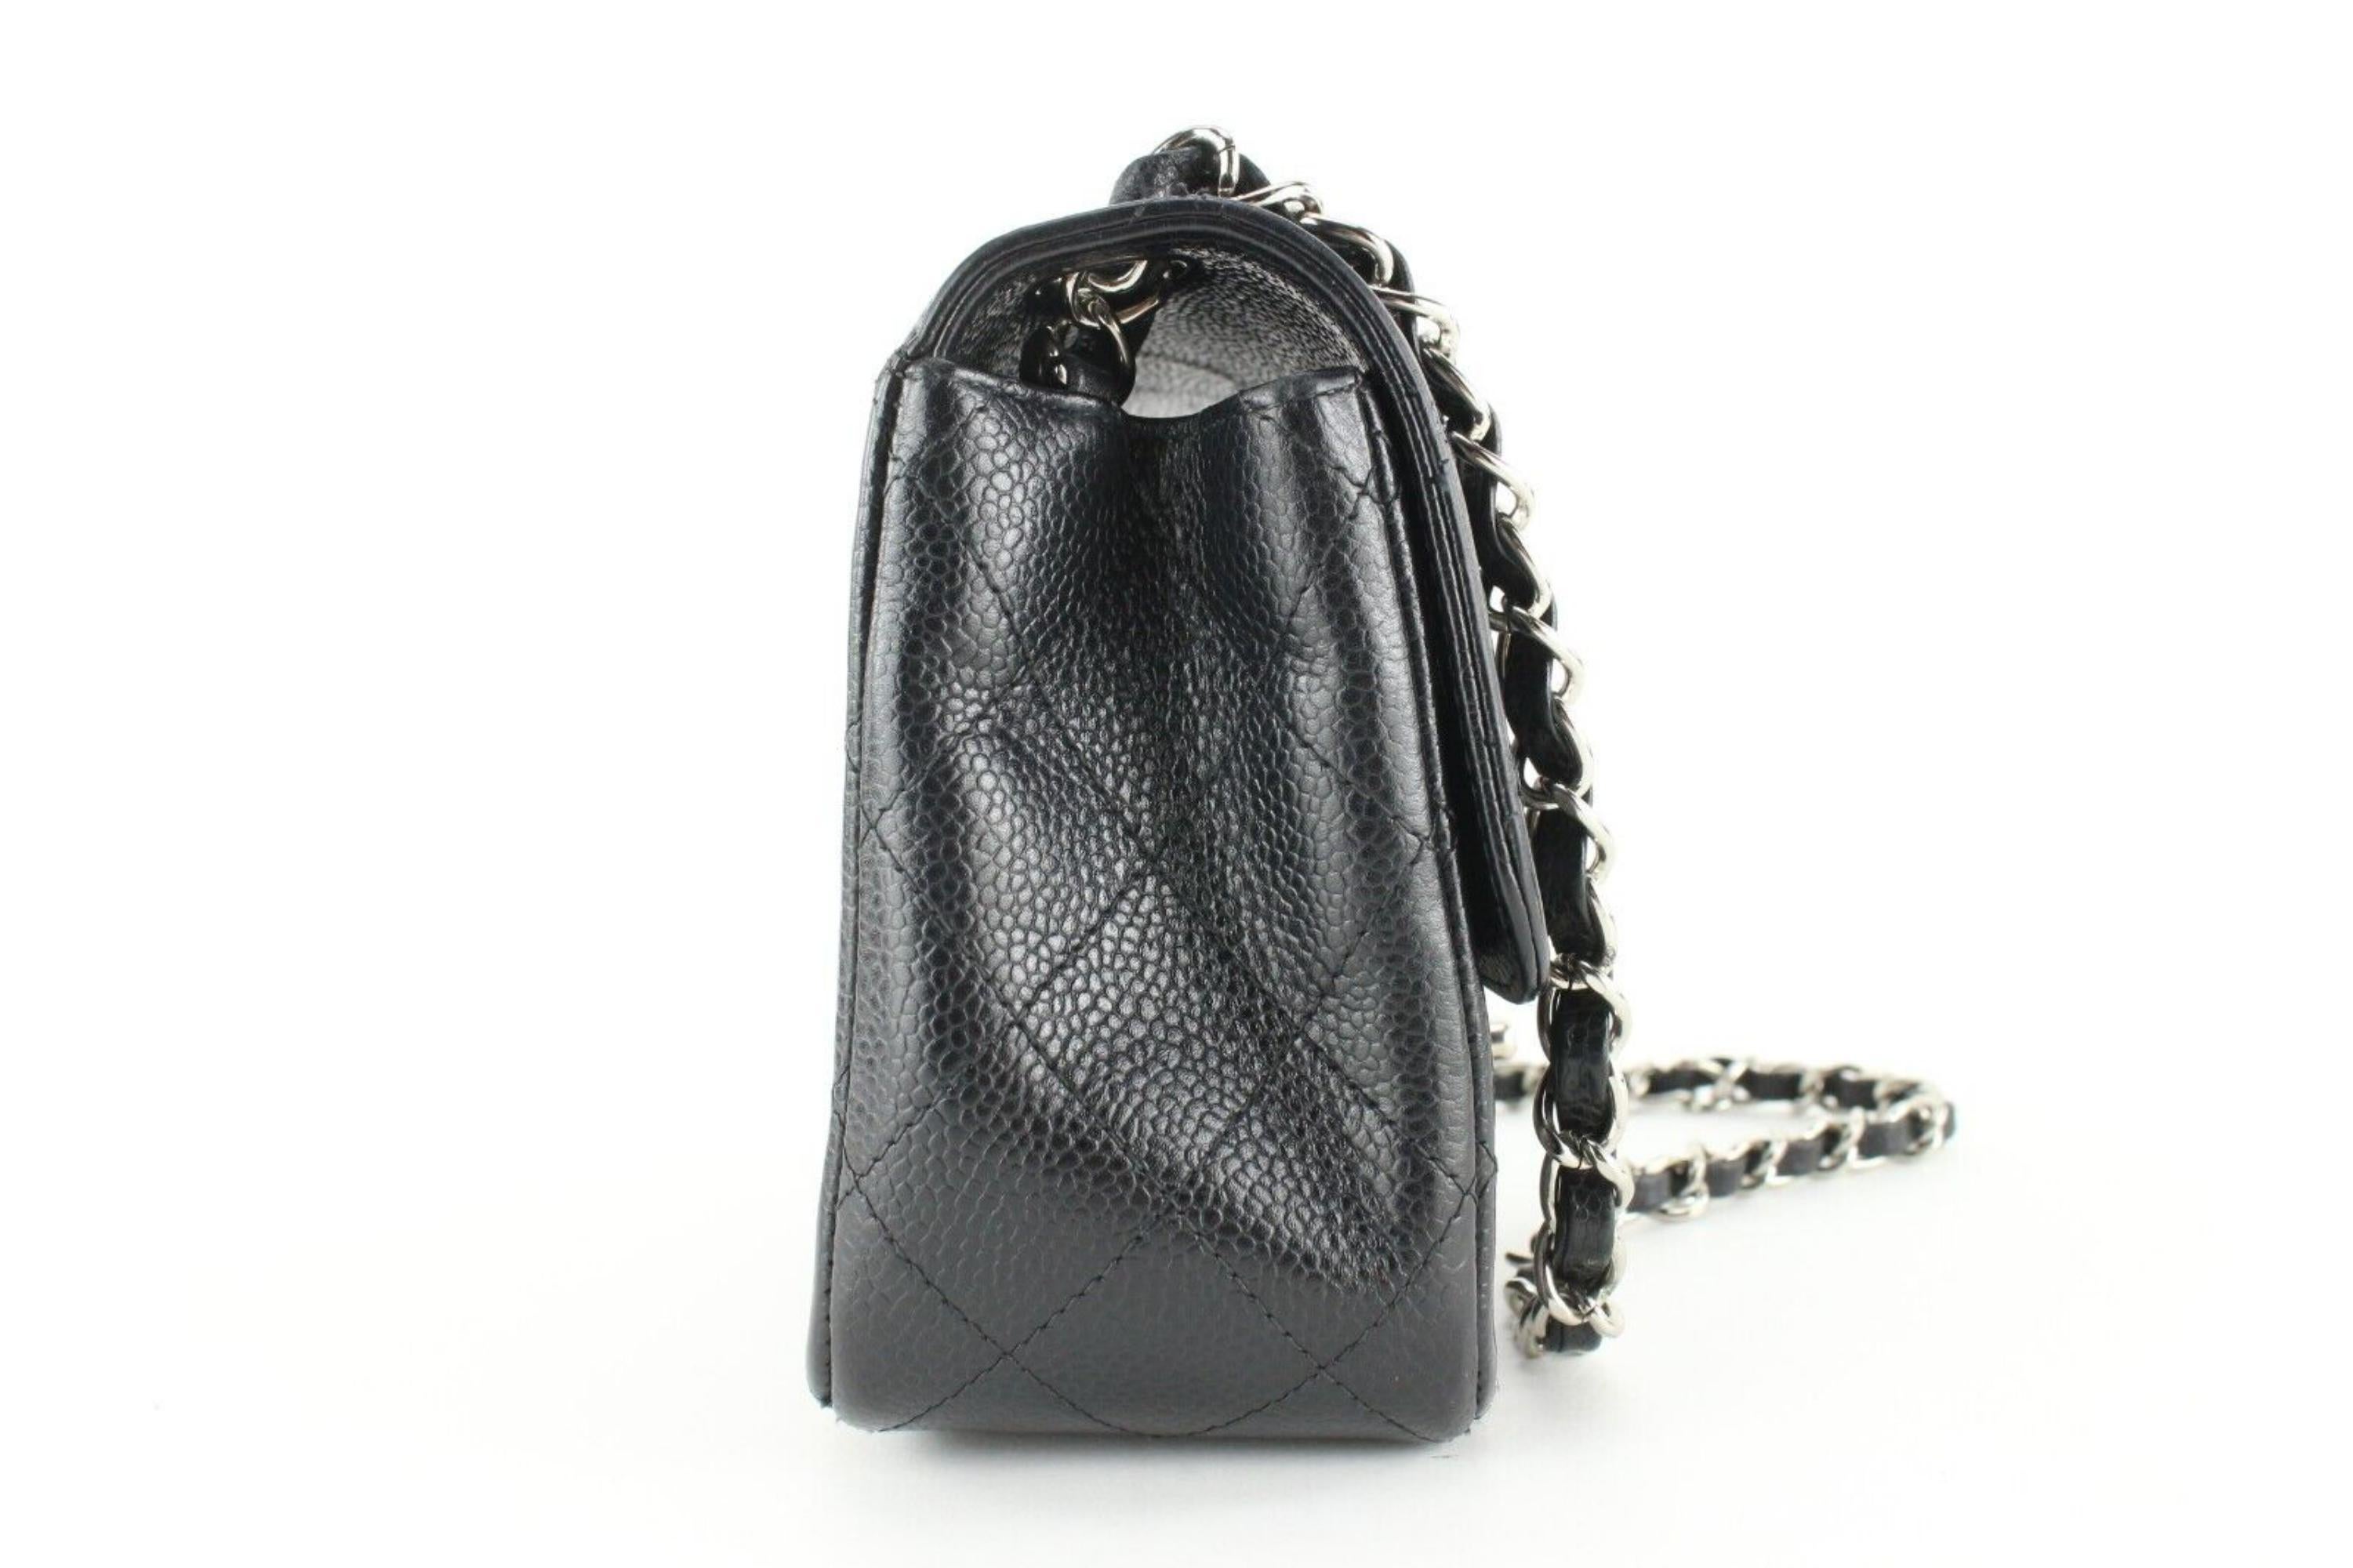 Chanel Black Quilted Caviar Leather Mini Square Classic Flap SHW RARE 19c26a For Sale 1